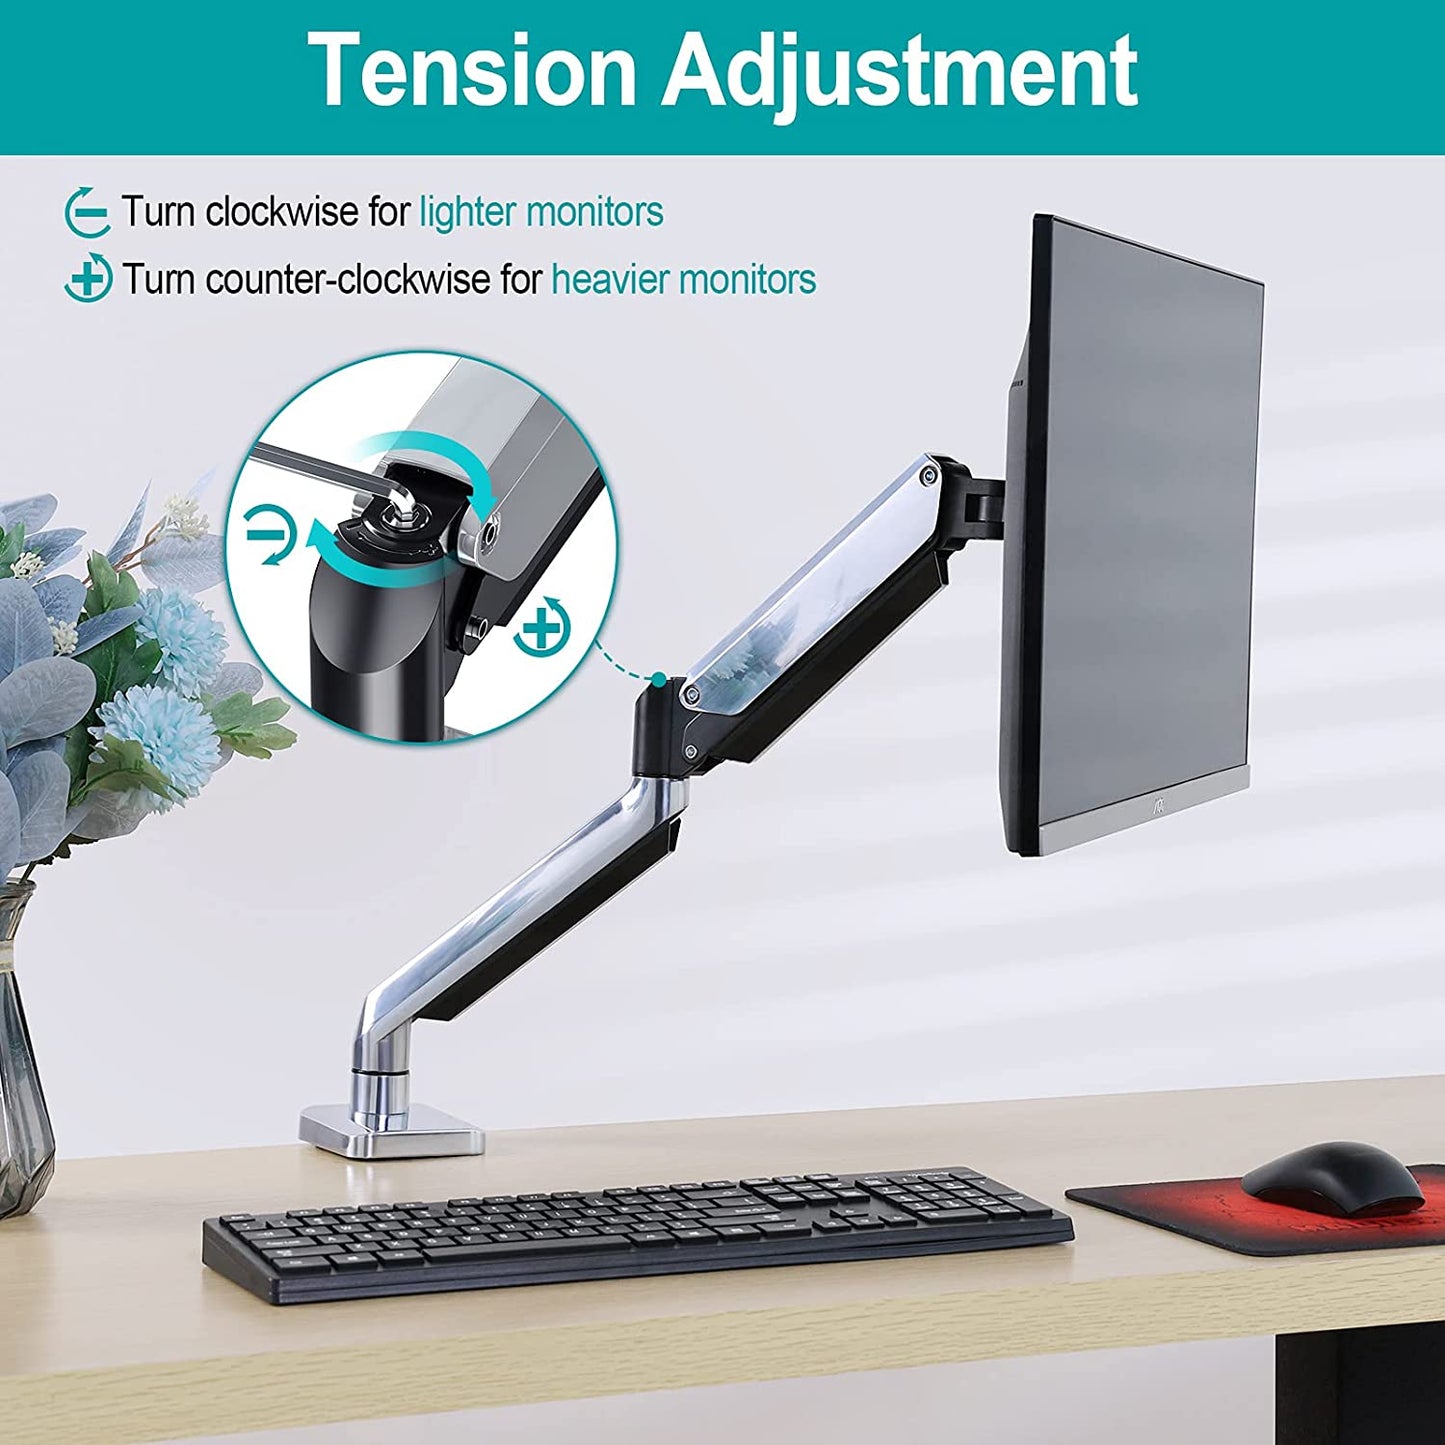 Single Arm gas spring monitor arm to adjust the monitor effortlessly